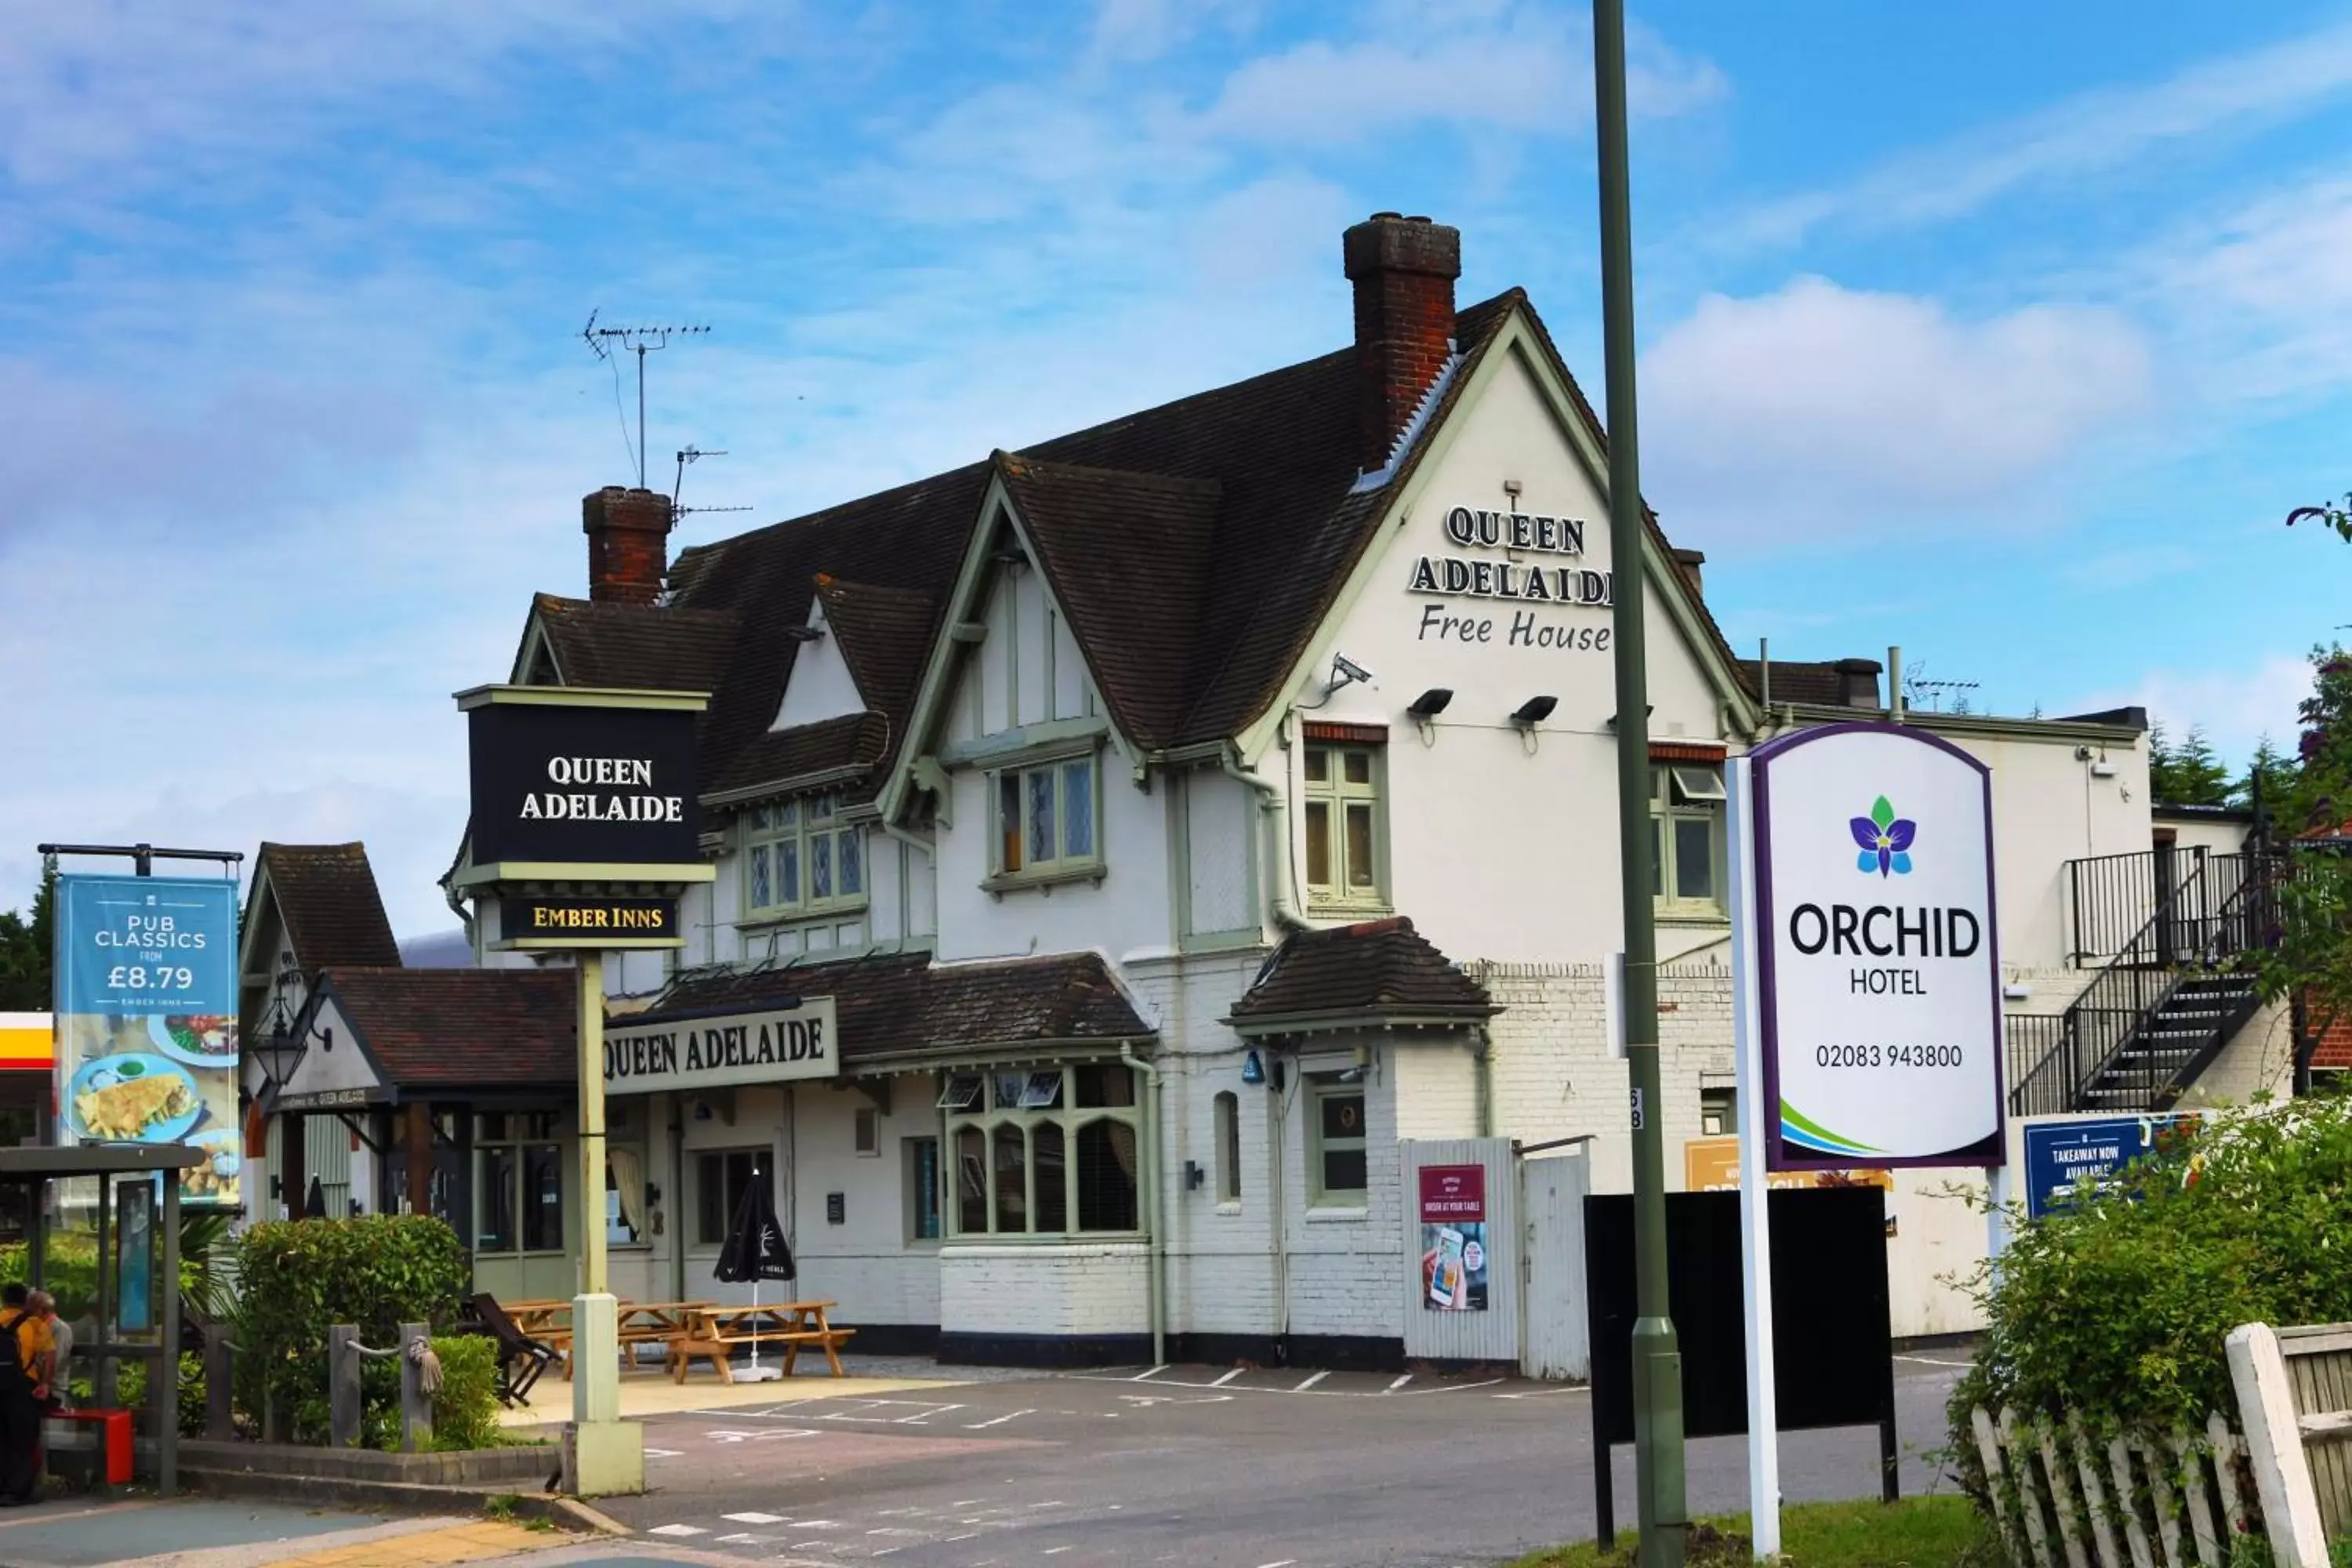 Area and facilities, Property Building in Orchid Epsom; Sure Hotel Collection by Best Western